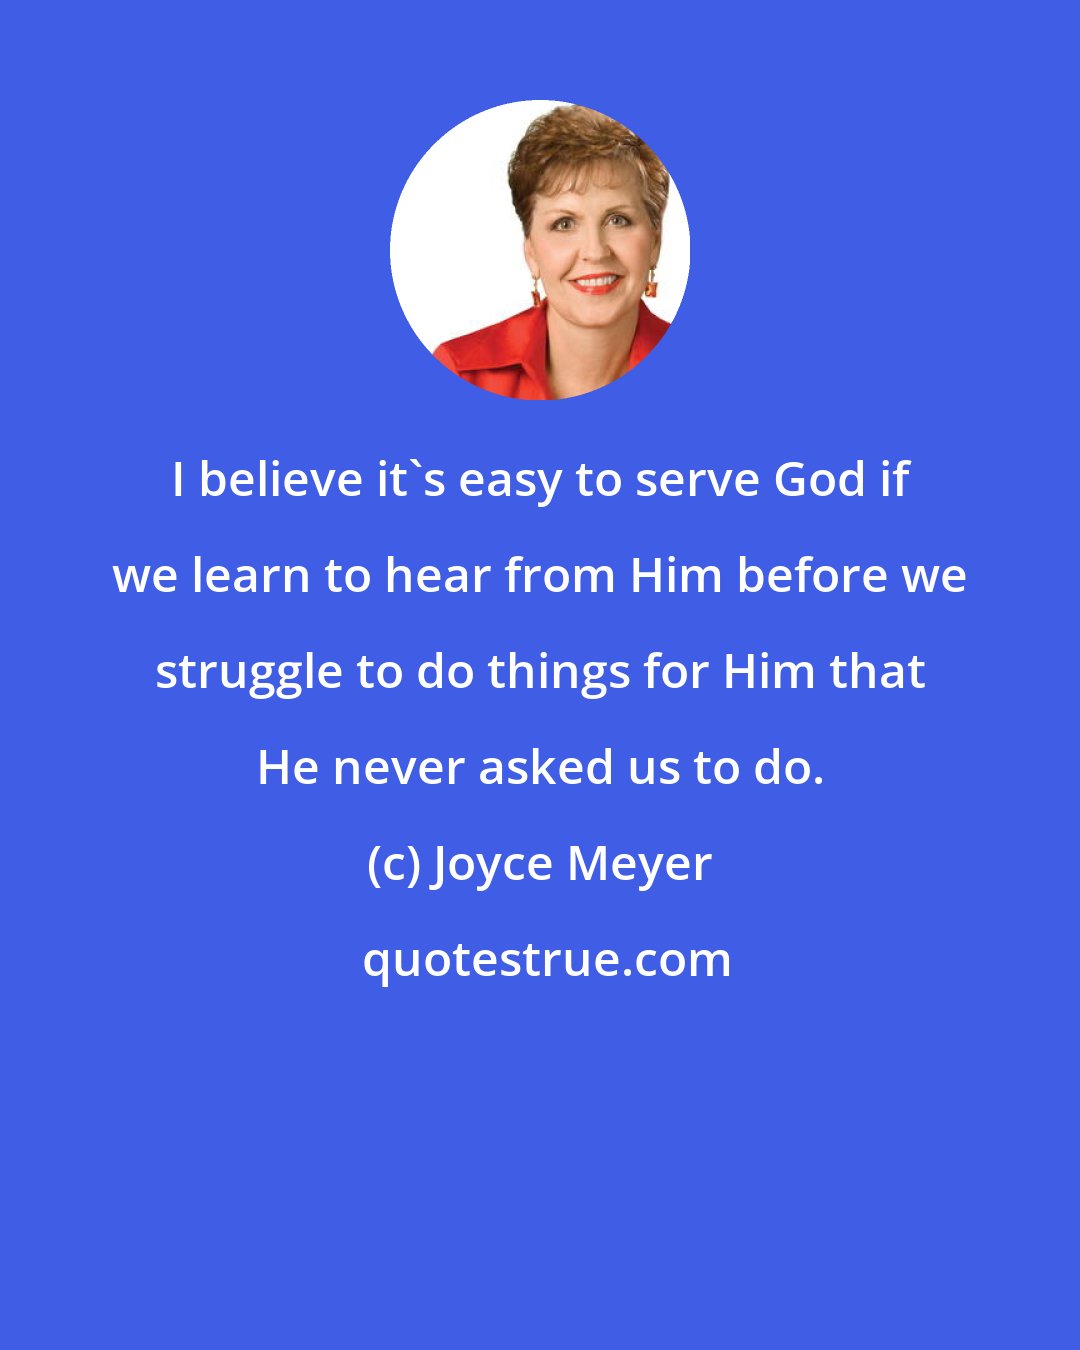 Joyce Meyer: I believe it's easy to serve God if we learn to hear from Him before we struggle to do things for Him that He never asked us to do.